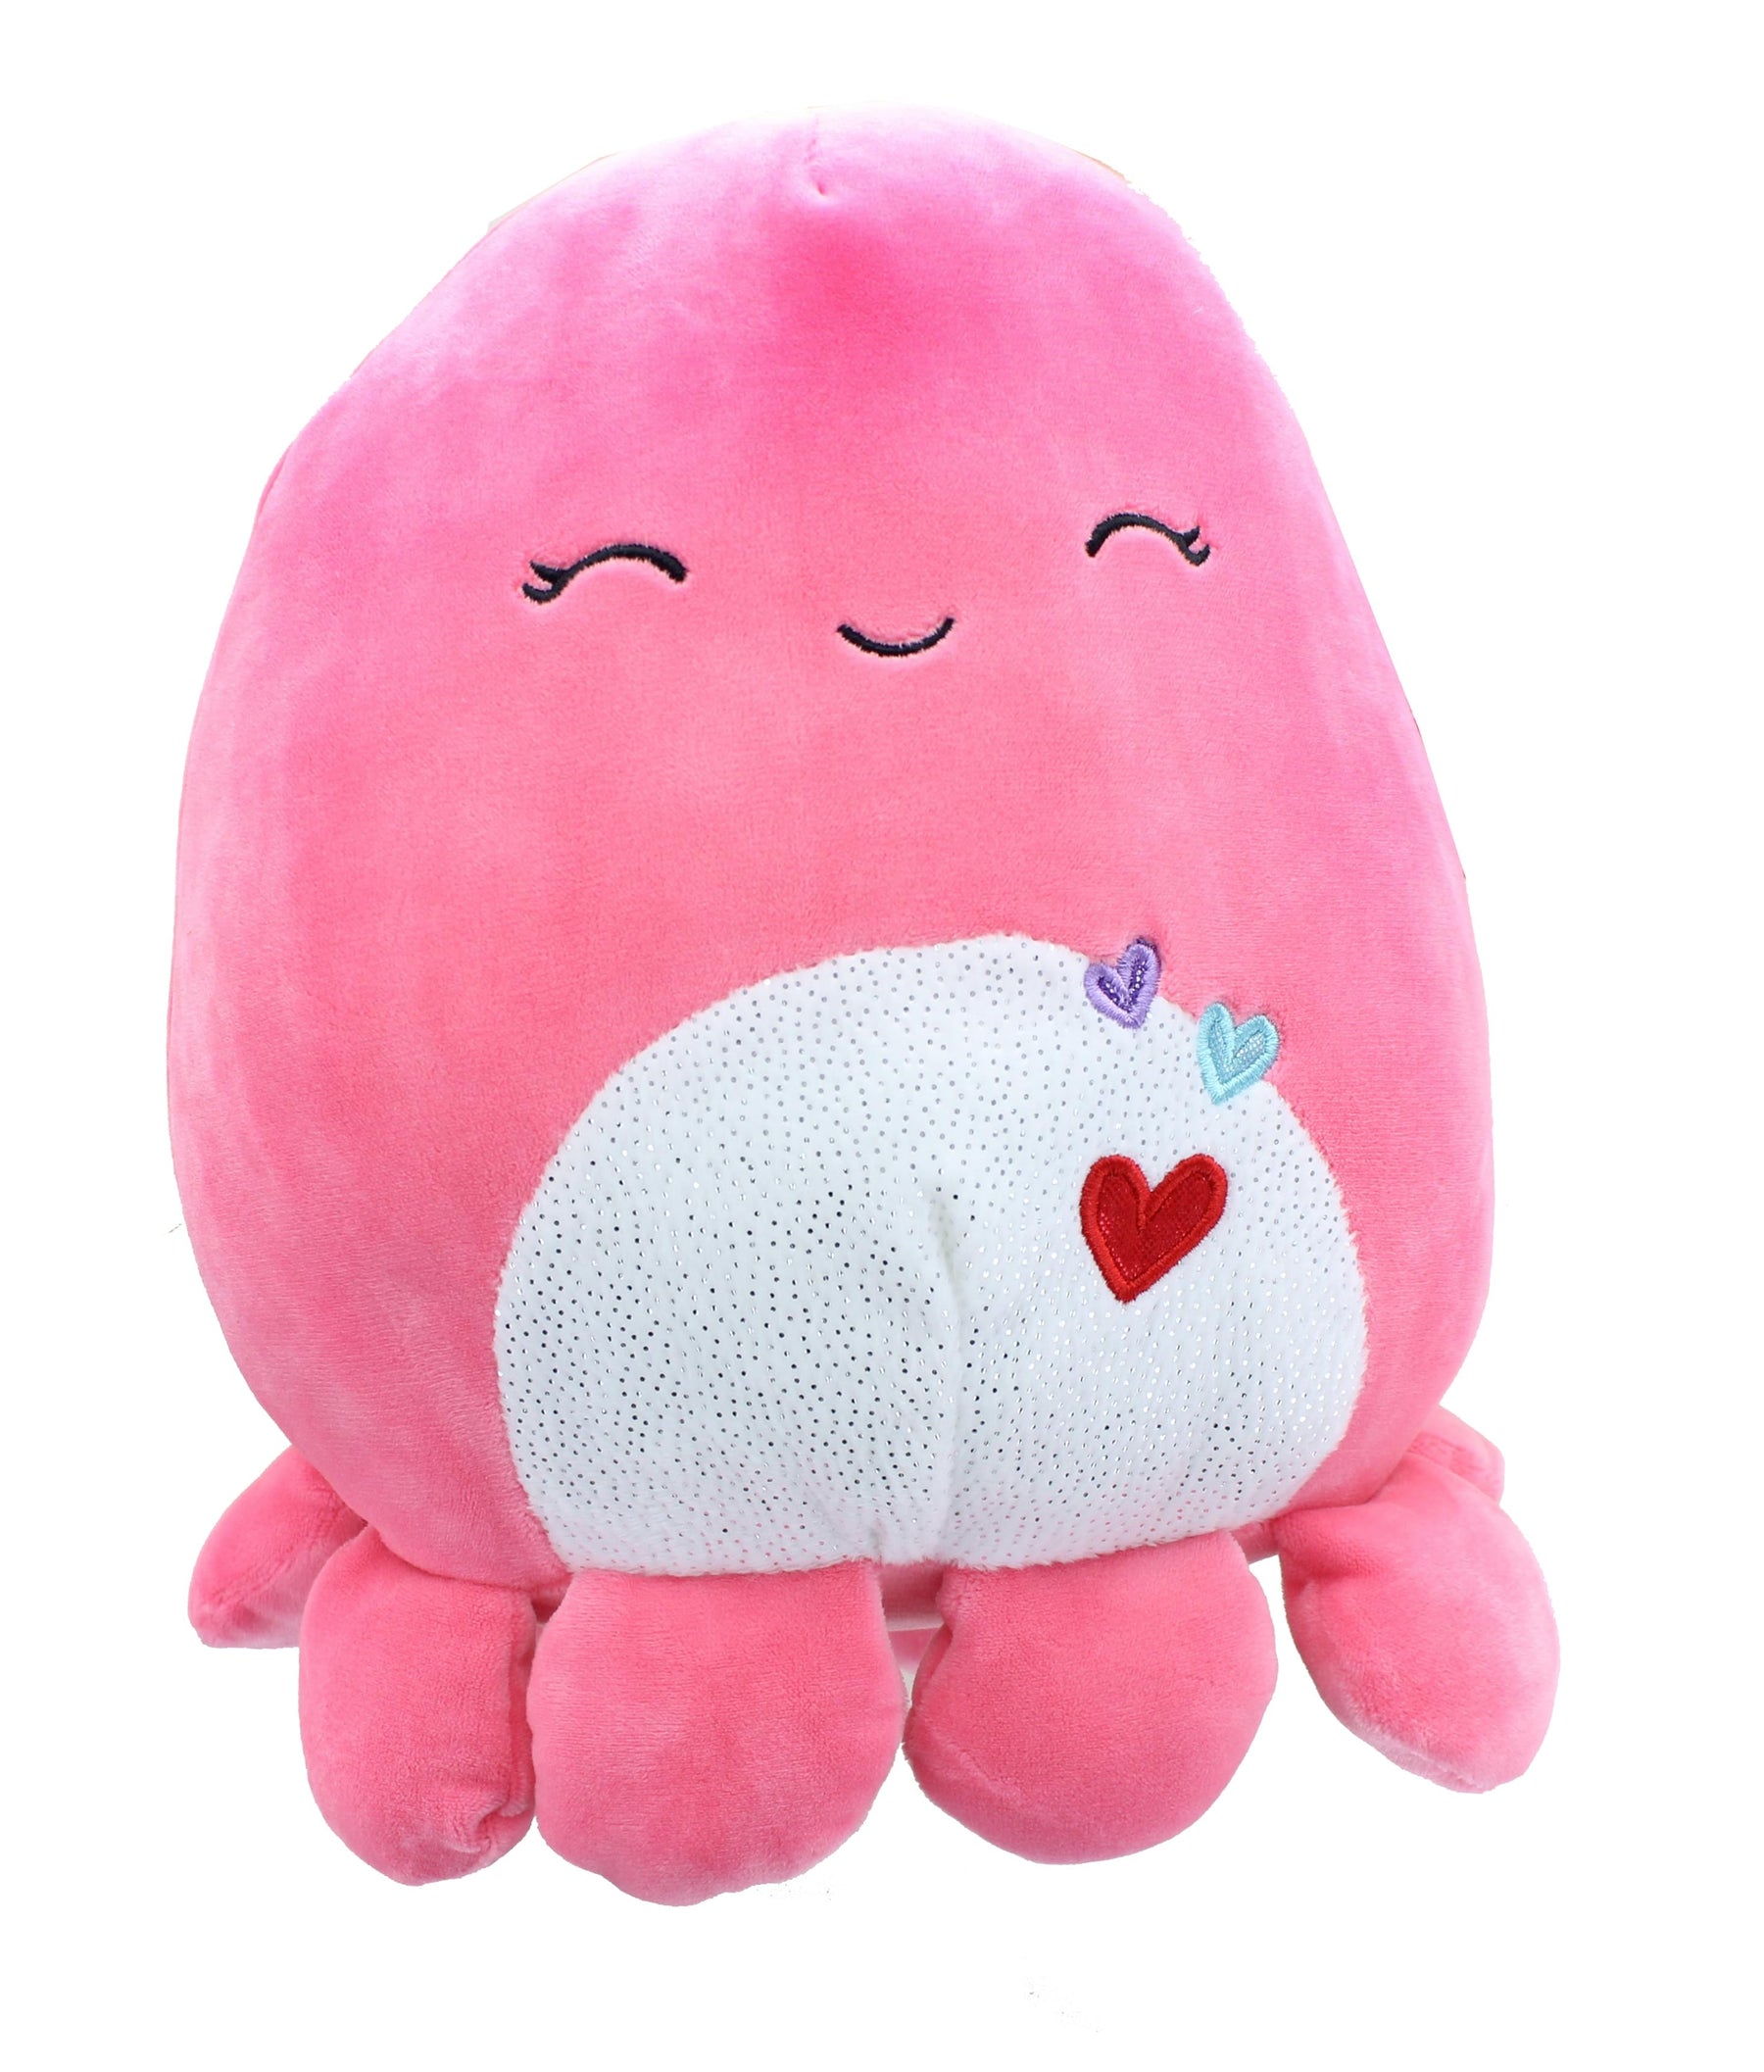 Squishmallow 5 Inch Valentine's Day Plush | Abby the Pink Octopus